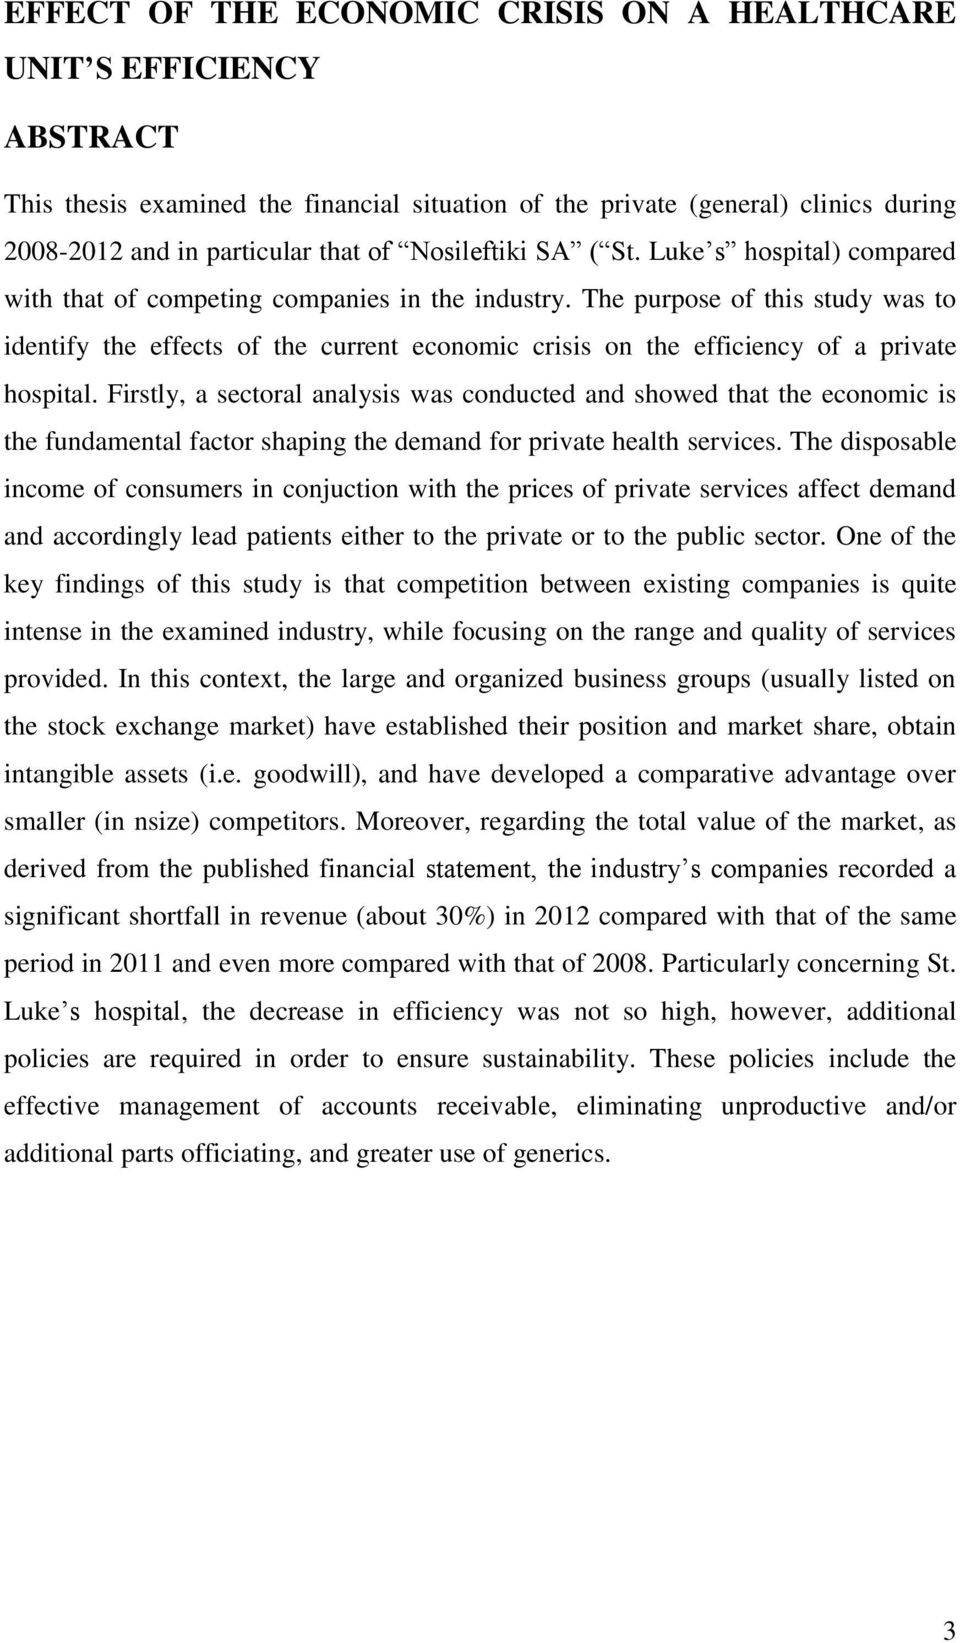 The purpose of this study was to identify the effects of the current economic crisis on the efficiency of a private hospital.